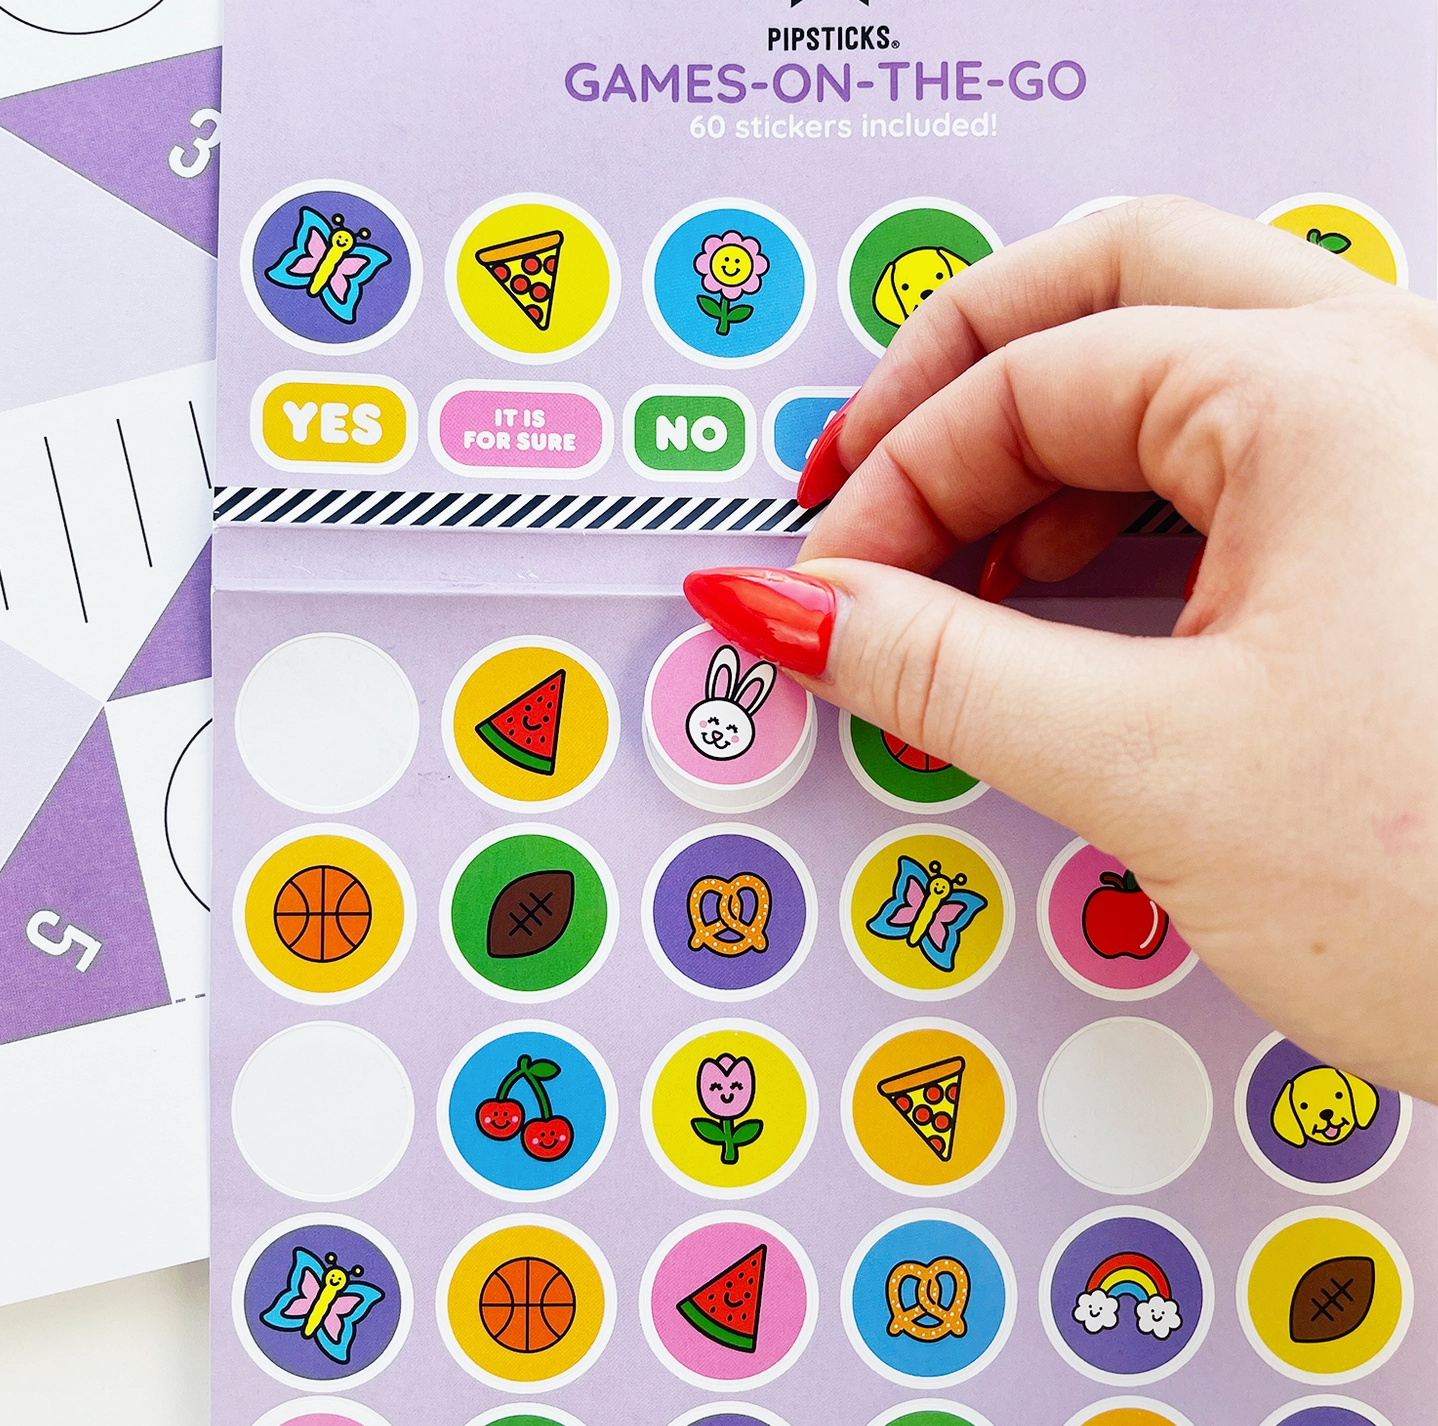 Fortune Teller On-The-Go Pad